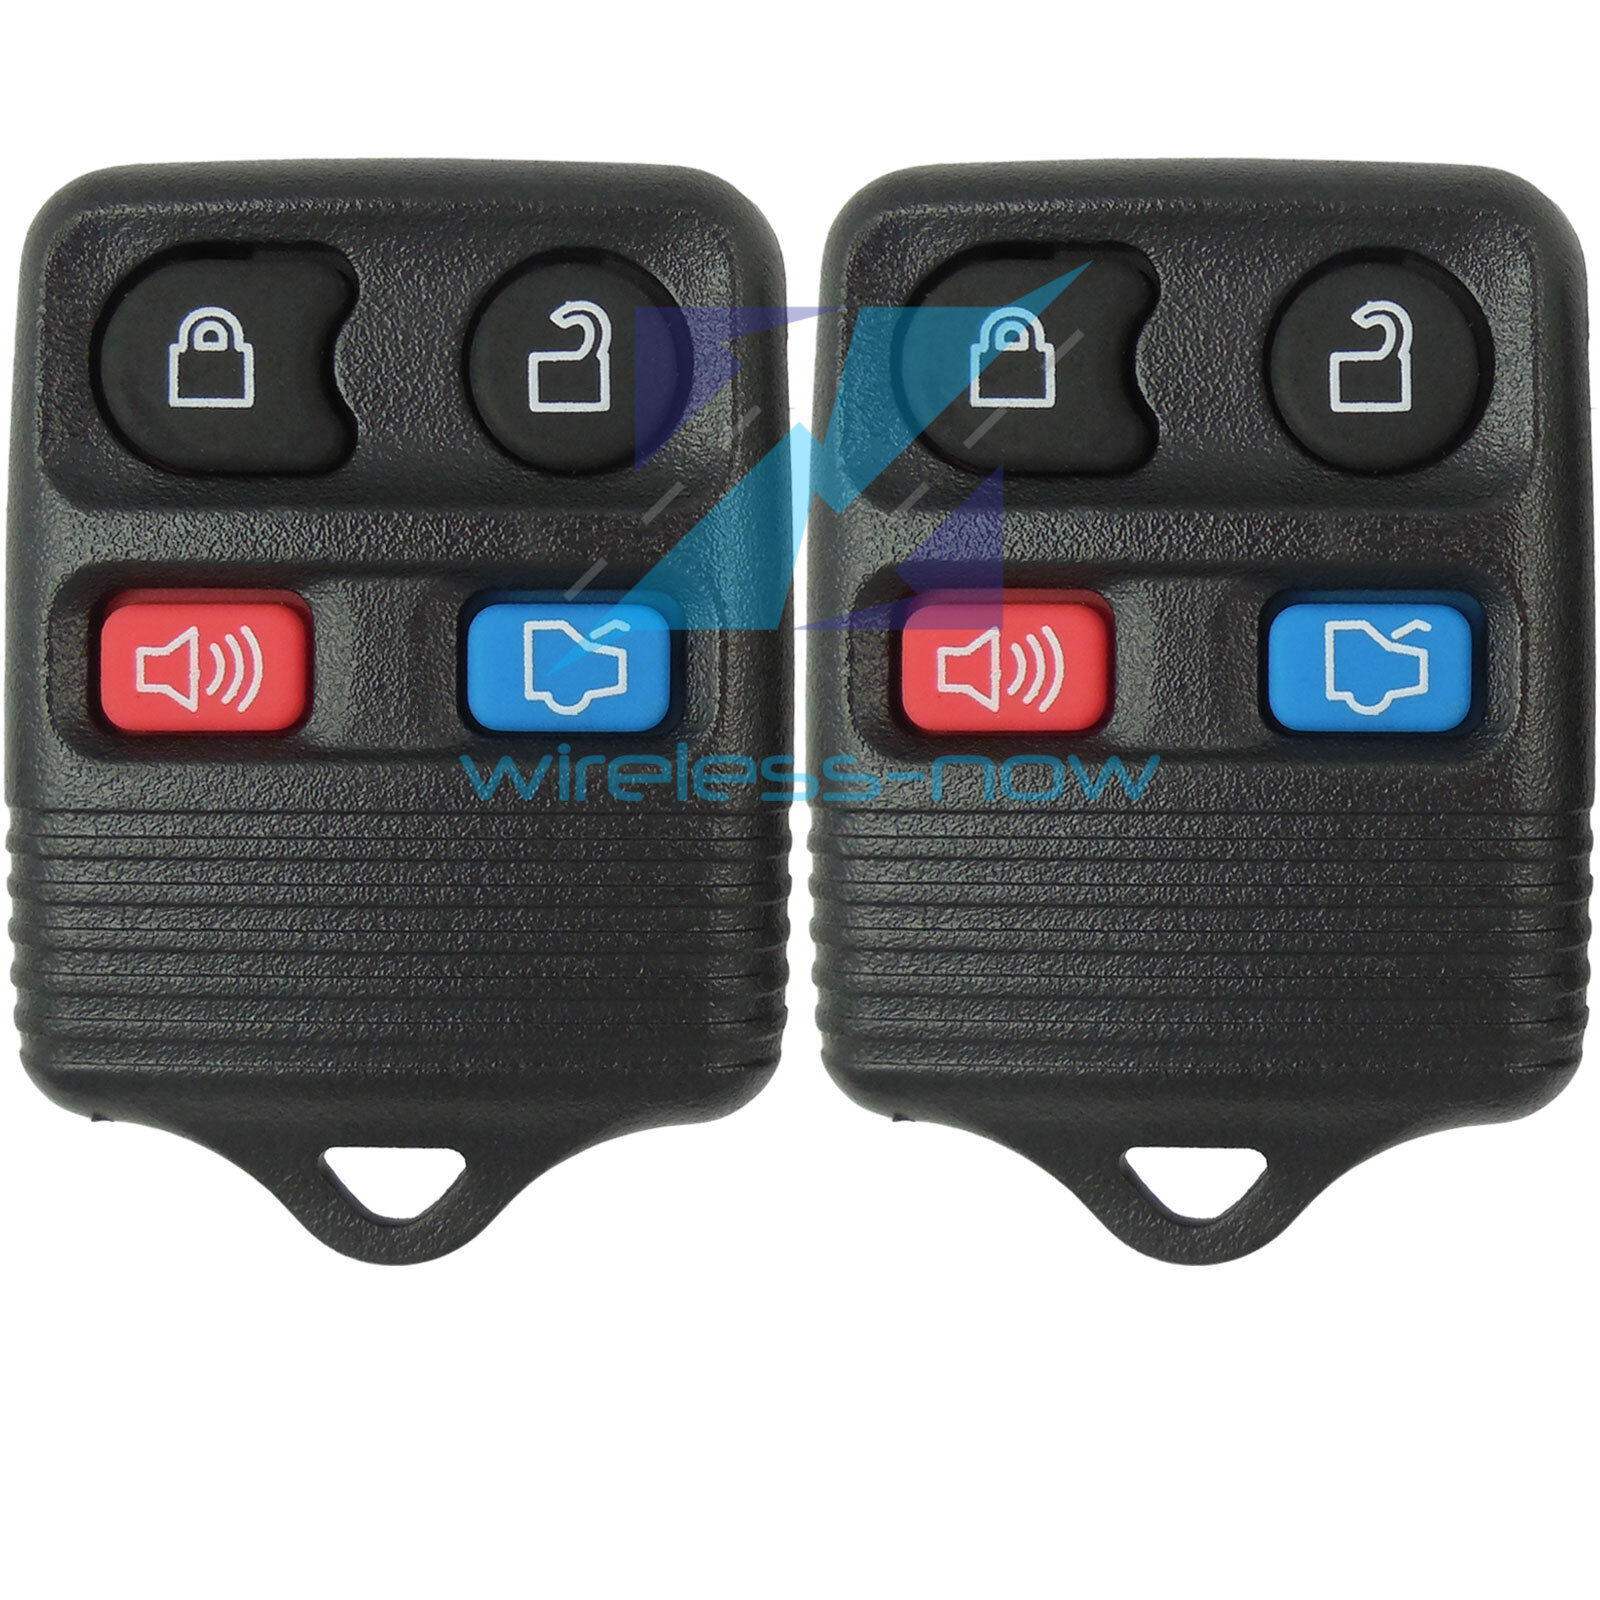 Pair New Replacement Remote Keyless Entry Key Fob Transmitter Clicker - 4 Button